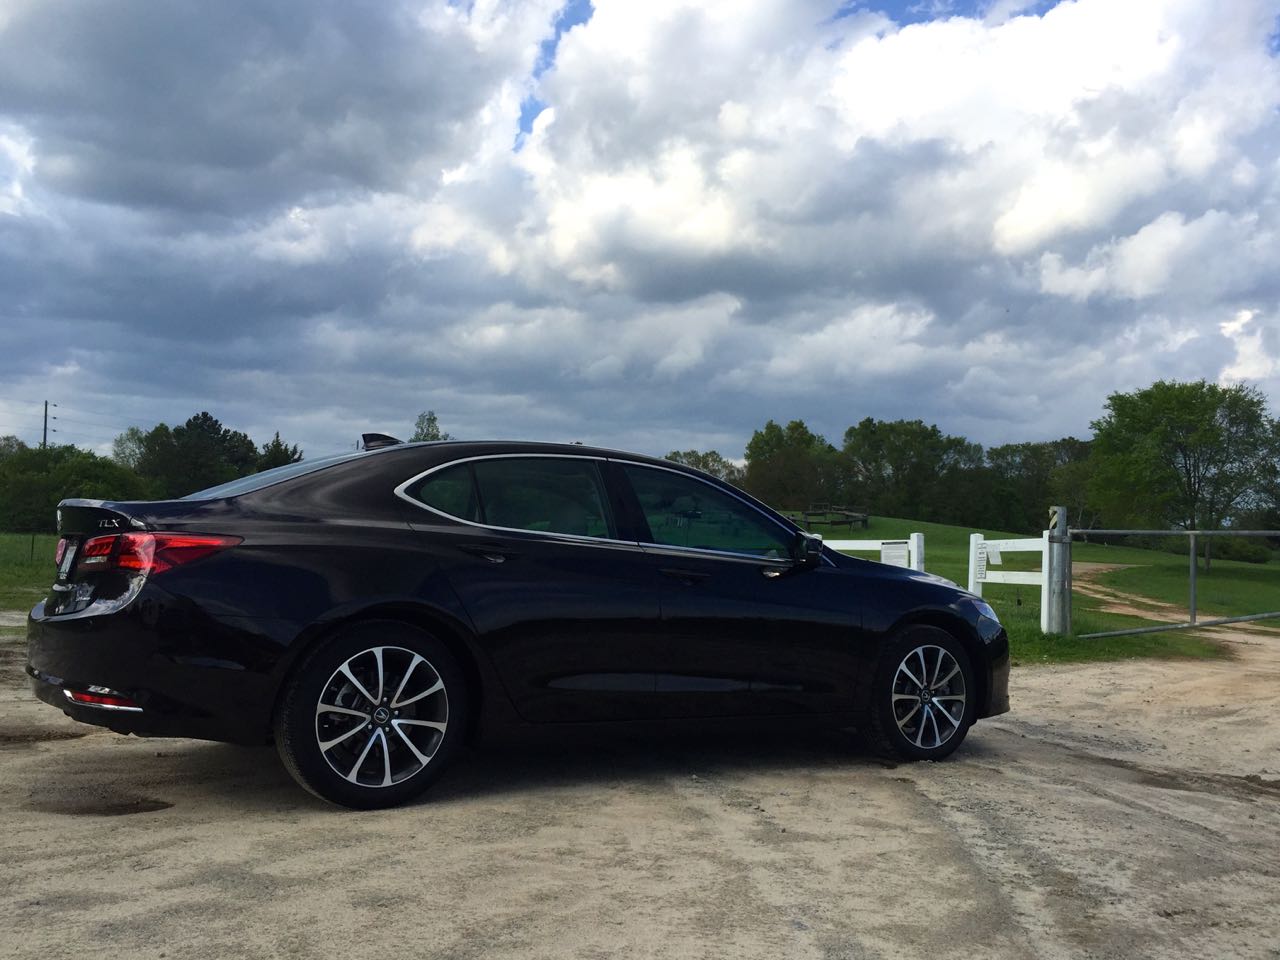 2015 Acura TLX SH-AWD Review